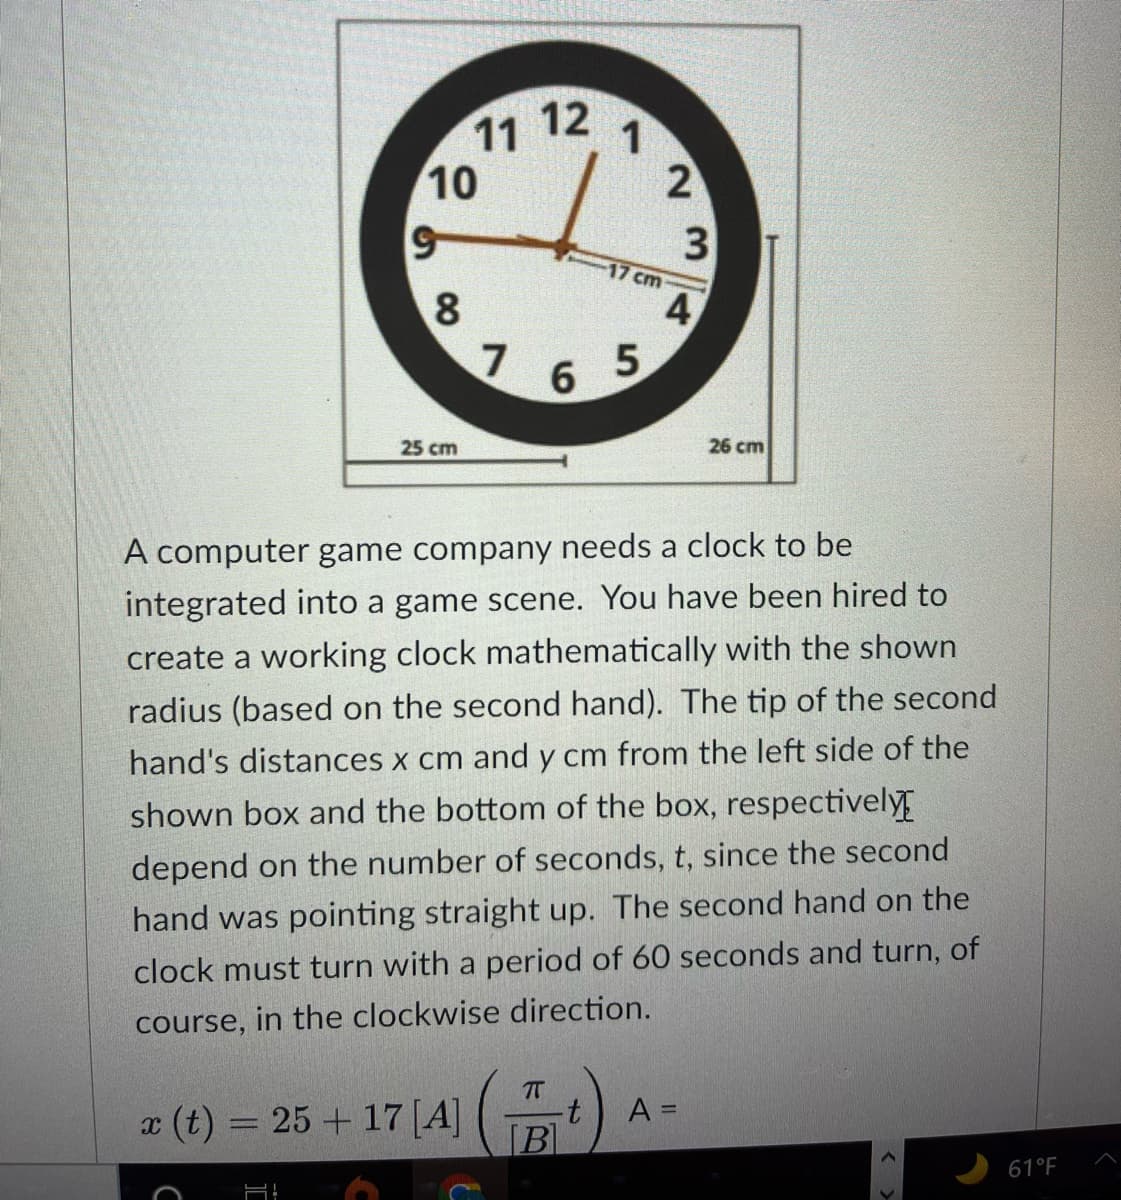 12
11
10
3
17 cm
8
4
6.
5
25 cm
26 cm
A computer game company needs a clock to be
integrated into a game scene. You have been hired to
create a working clock mathematically with the shown
radius (based on the second hand). The tip of the second
hand's distances x cm and y cm from the left side of the
shown box and the bottom of the box, respectively
depend on the number of seconds, t, since the second
hand was pointing straight up. The second hand on the
clock must turn with a period of 60 seconds and turn, of
course, in the clockwise direction.
T
t.
[B]
A =
x (t) = 25 + 17 [A]
%3D
61°F
